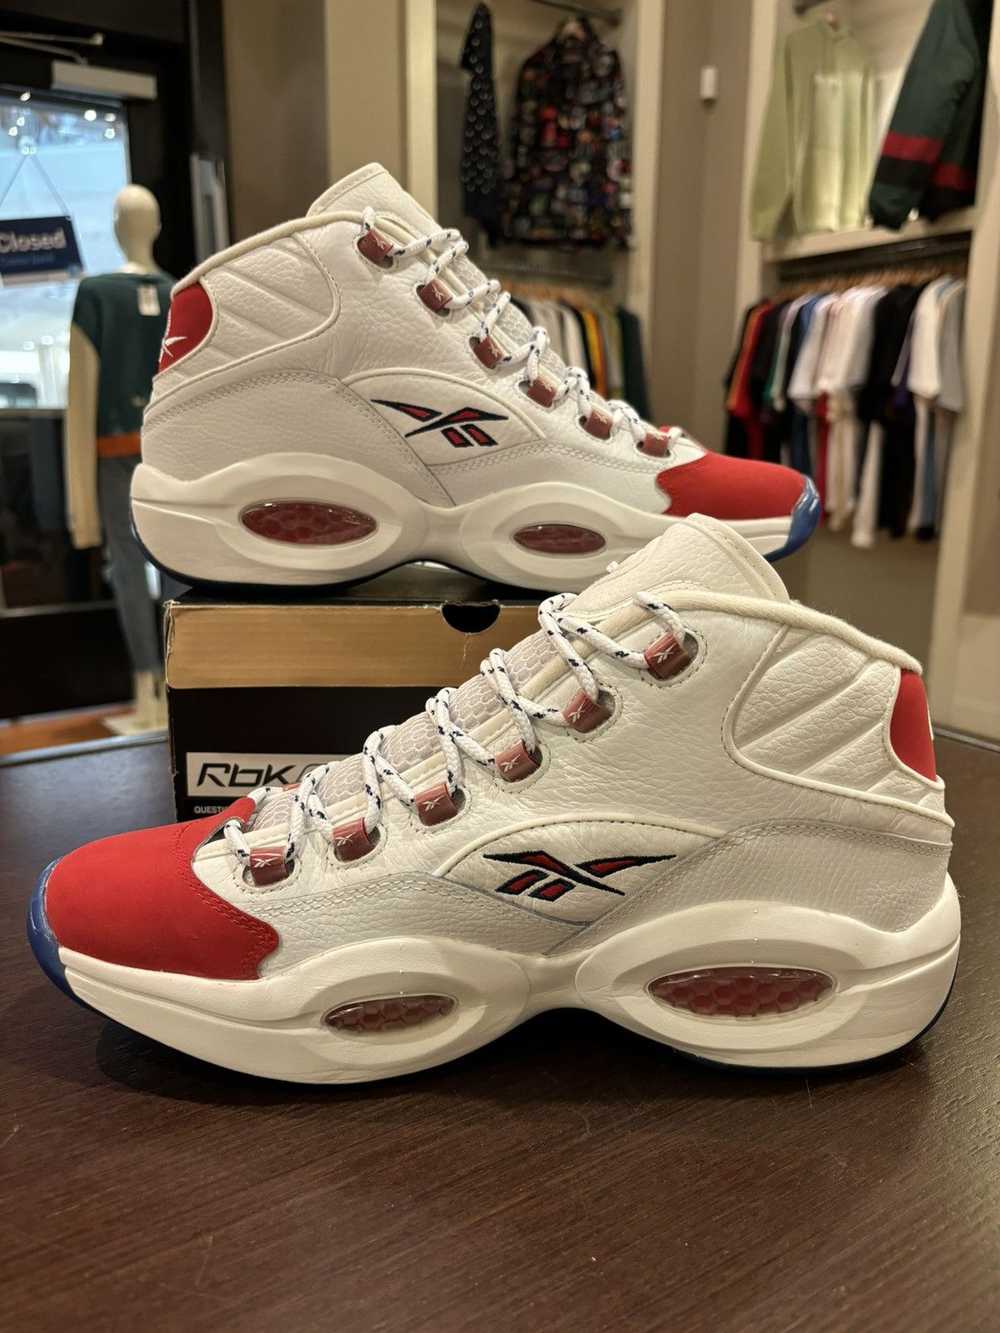 Reebok Reebok question mid white/red - image 5